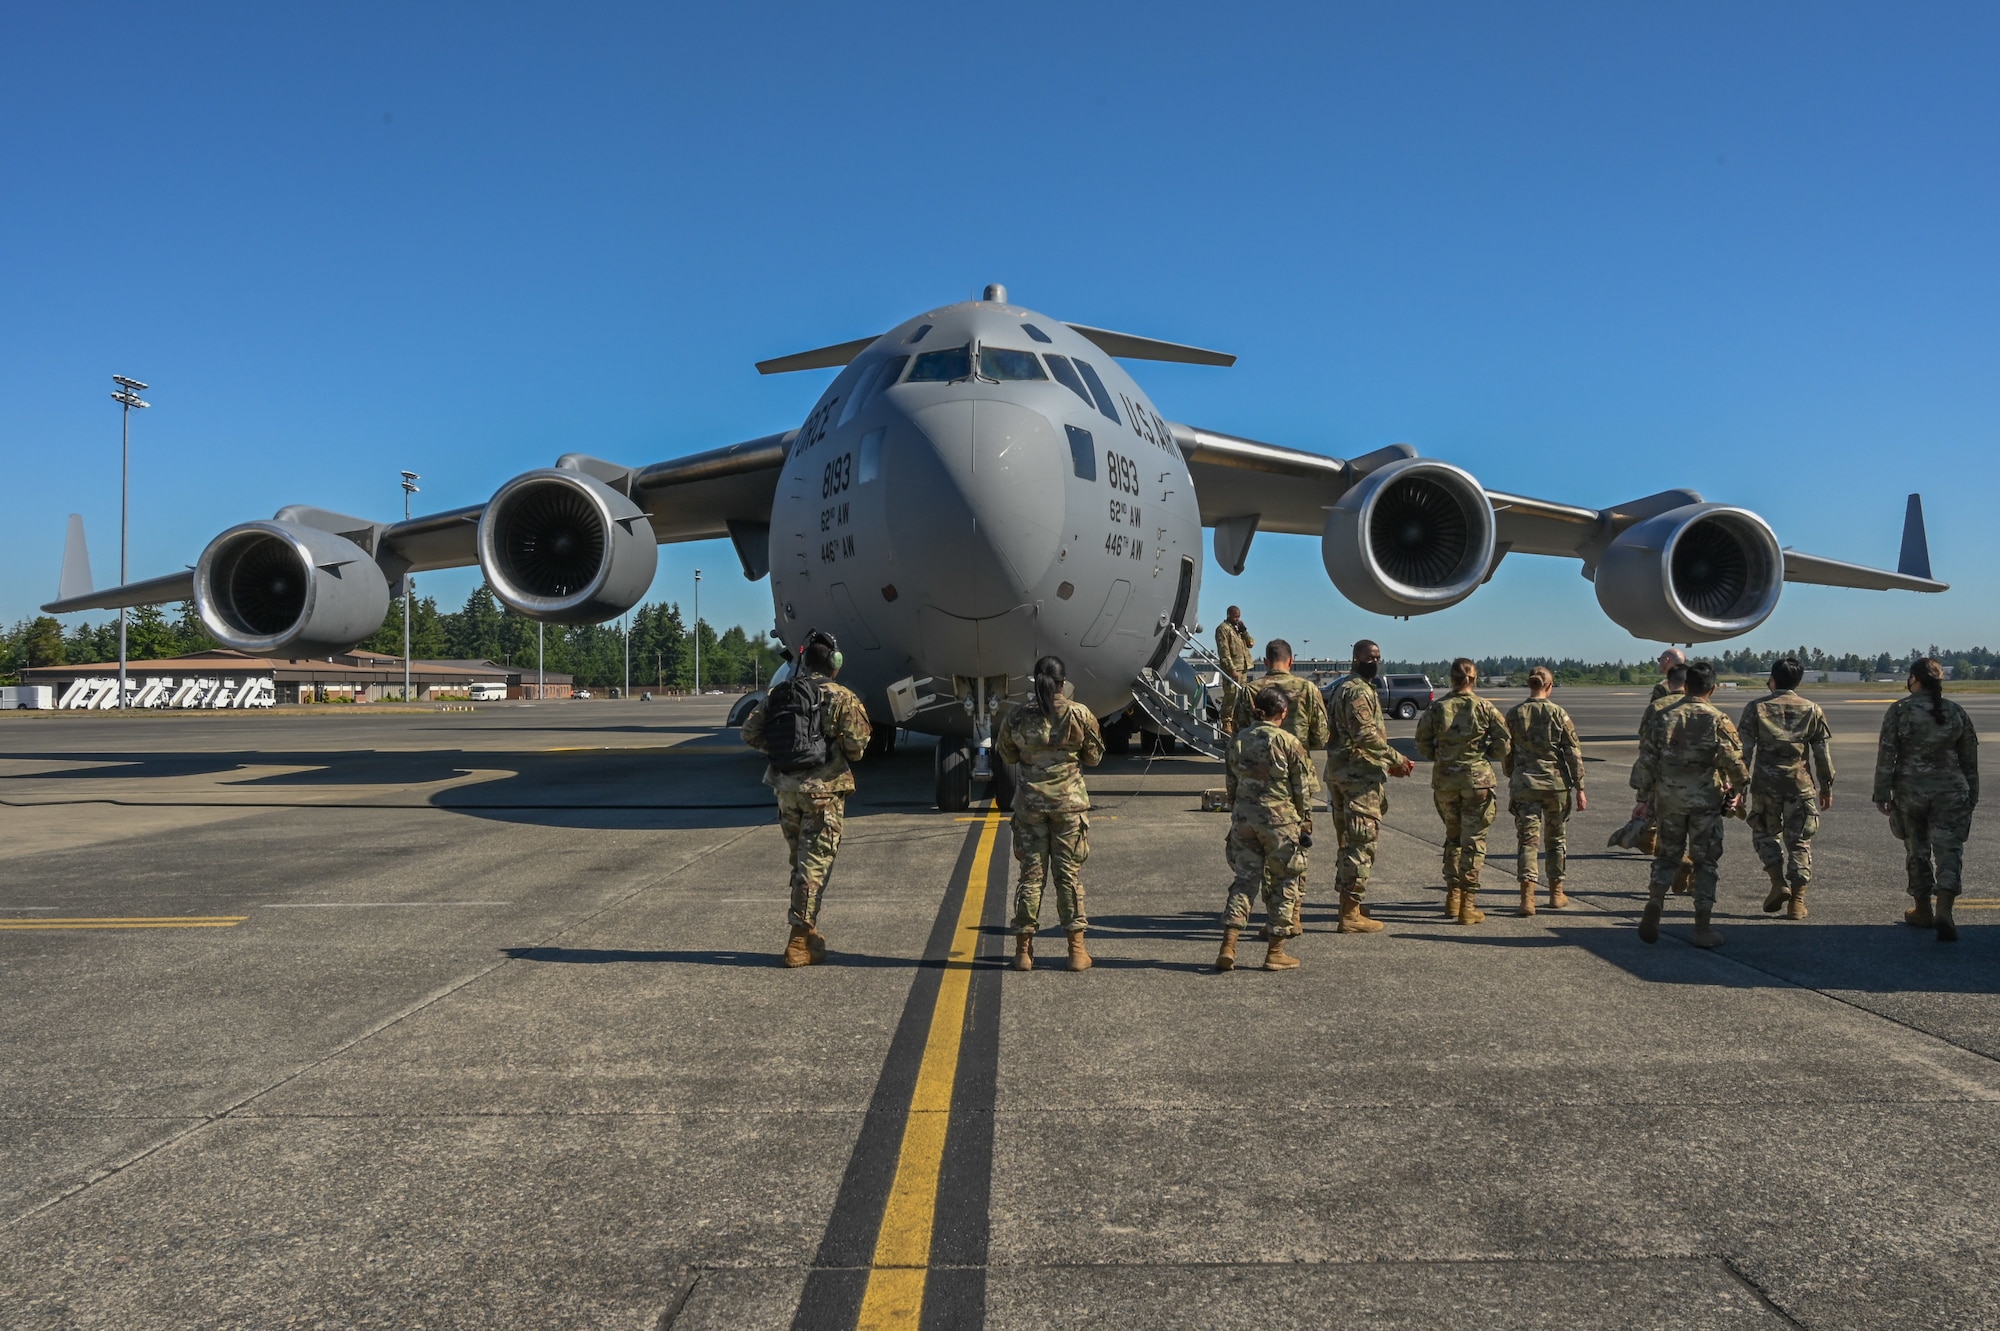 Team McChord Airmen board a C-17 Globemaster III as part of Airmen Experience at Joint Base Lewis-McChord, Washington, June 2, 2021. As part of the Airmen Experience, Airmen receive a briefing about the Team McChord mission, tour different units as well as participate in an orientation flight. (U.S. Air Force photo by Airman 1st Class Callie Norton)